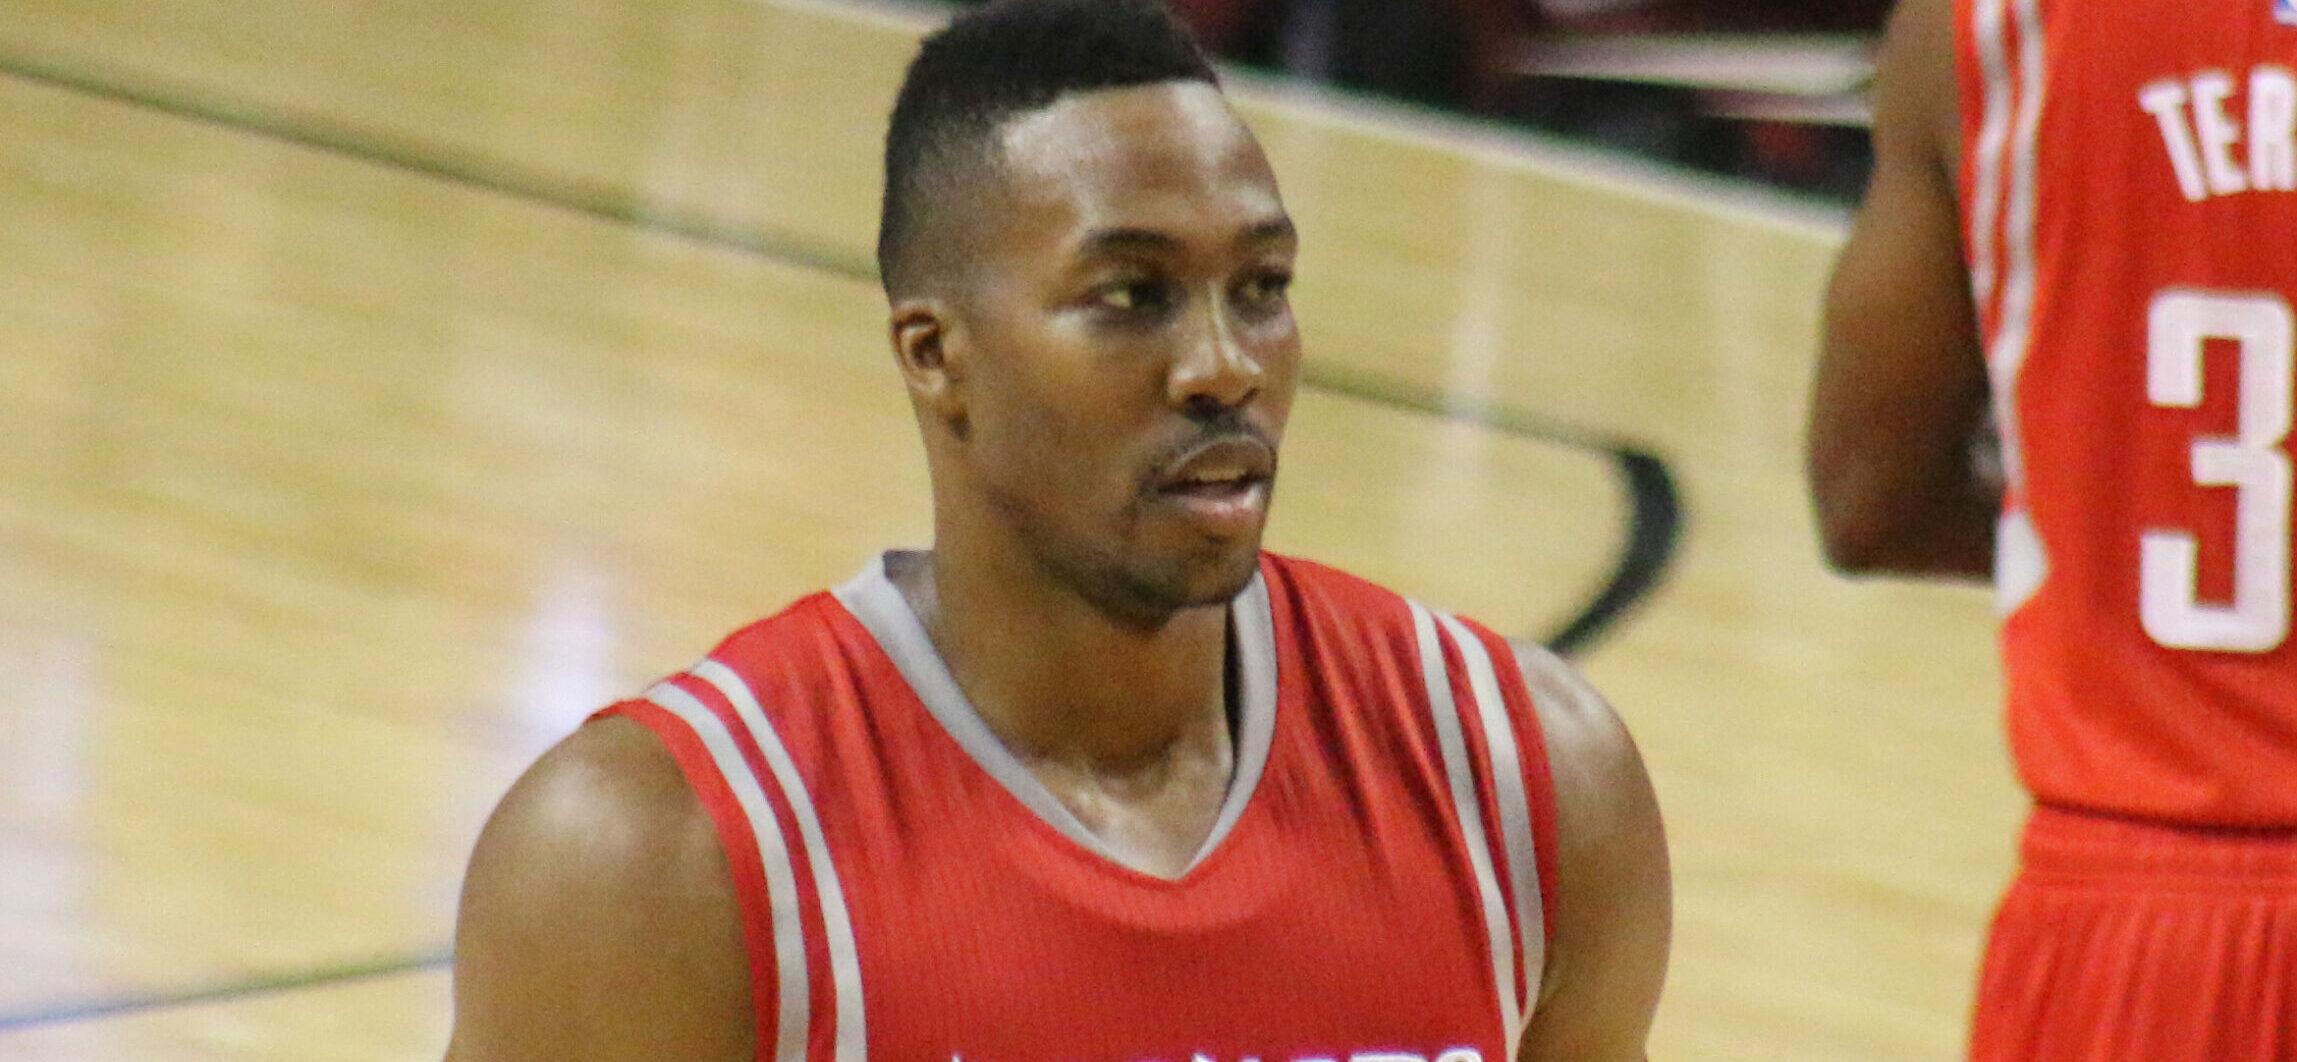 NBA Star Dwight Howard Gets Emotional About ‘Masked Singer’ Appearance